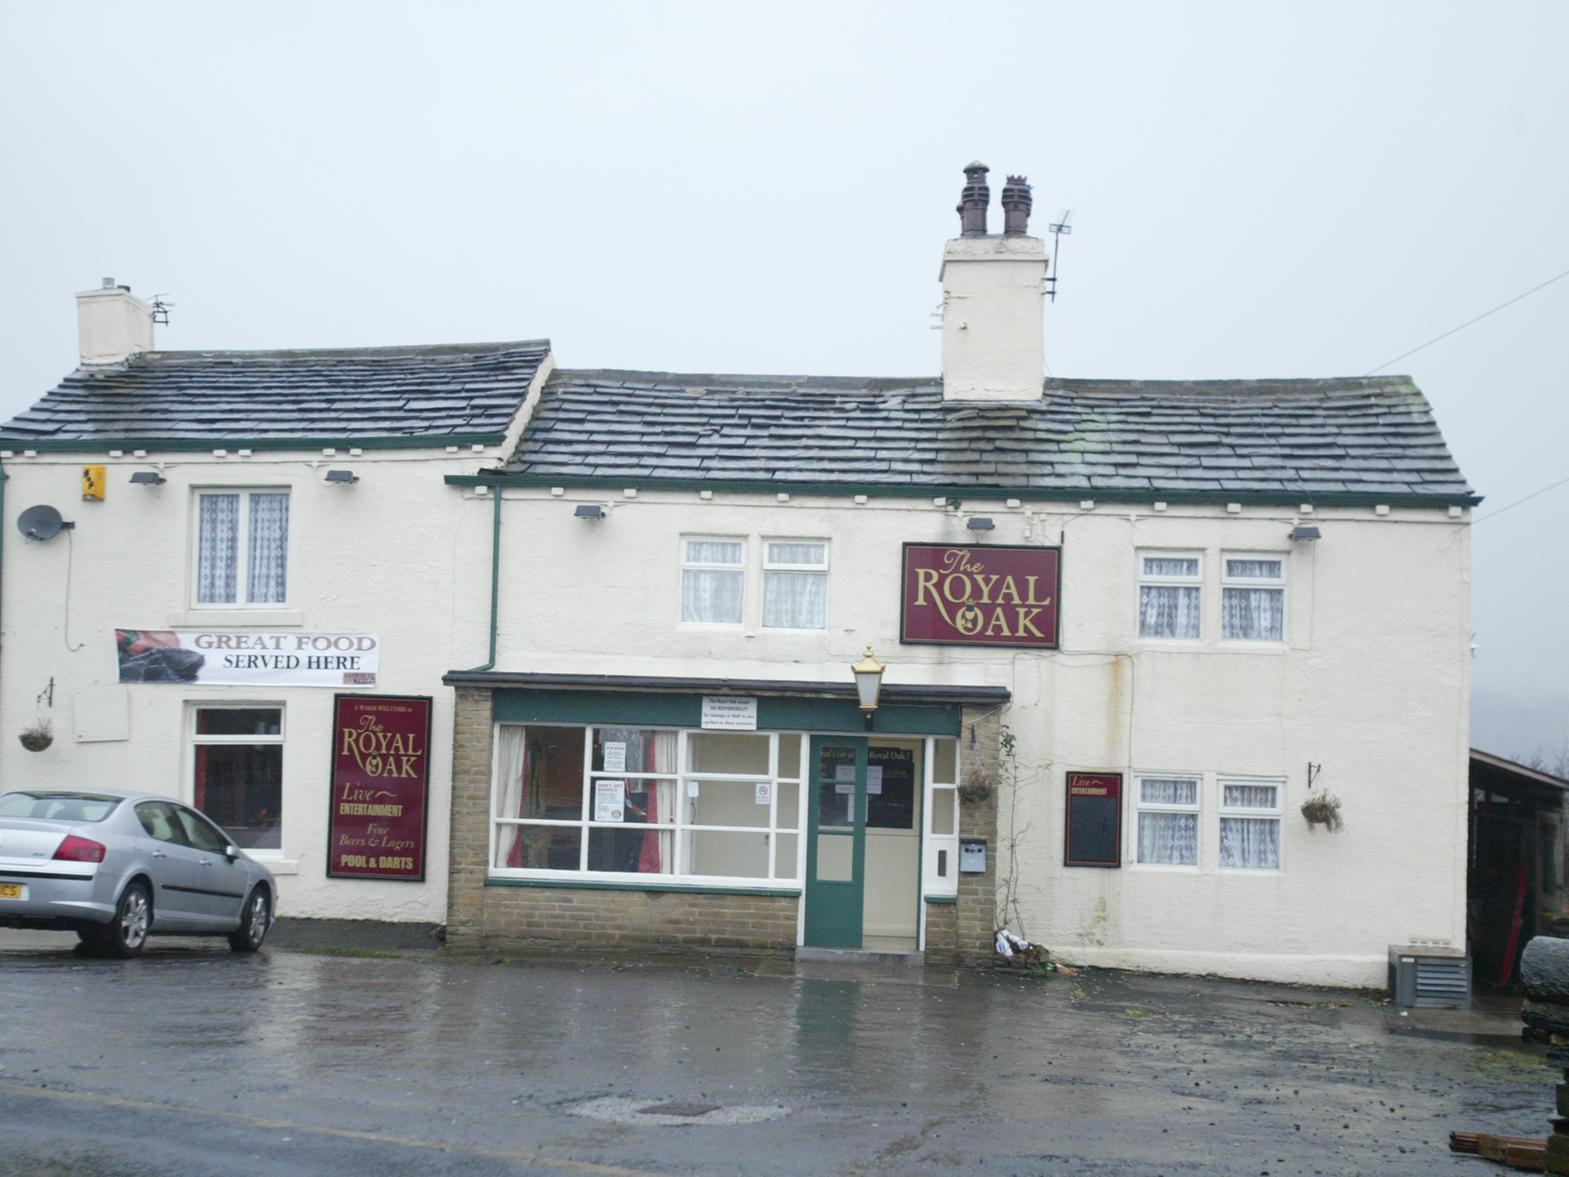 The former pub used to sit on Lower Edge Road but the venue has since been turned into a house. It is thought The Royal Oak dated back to at least 1850.